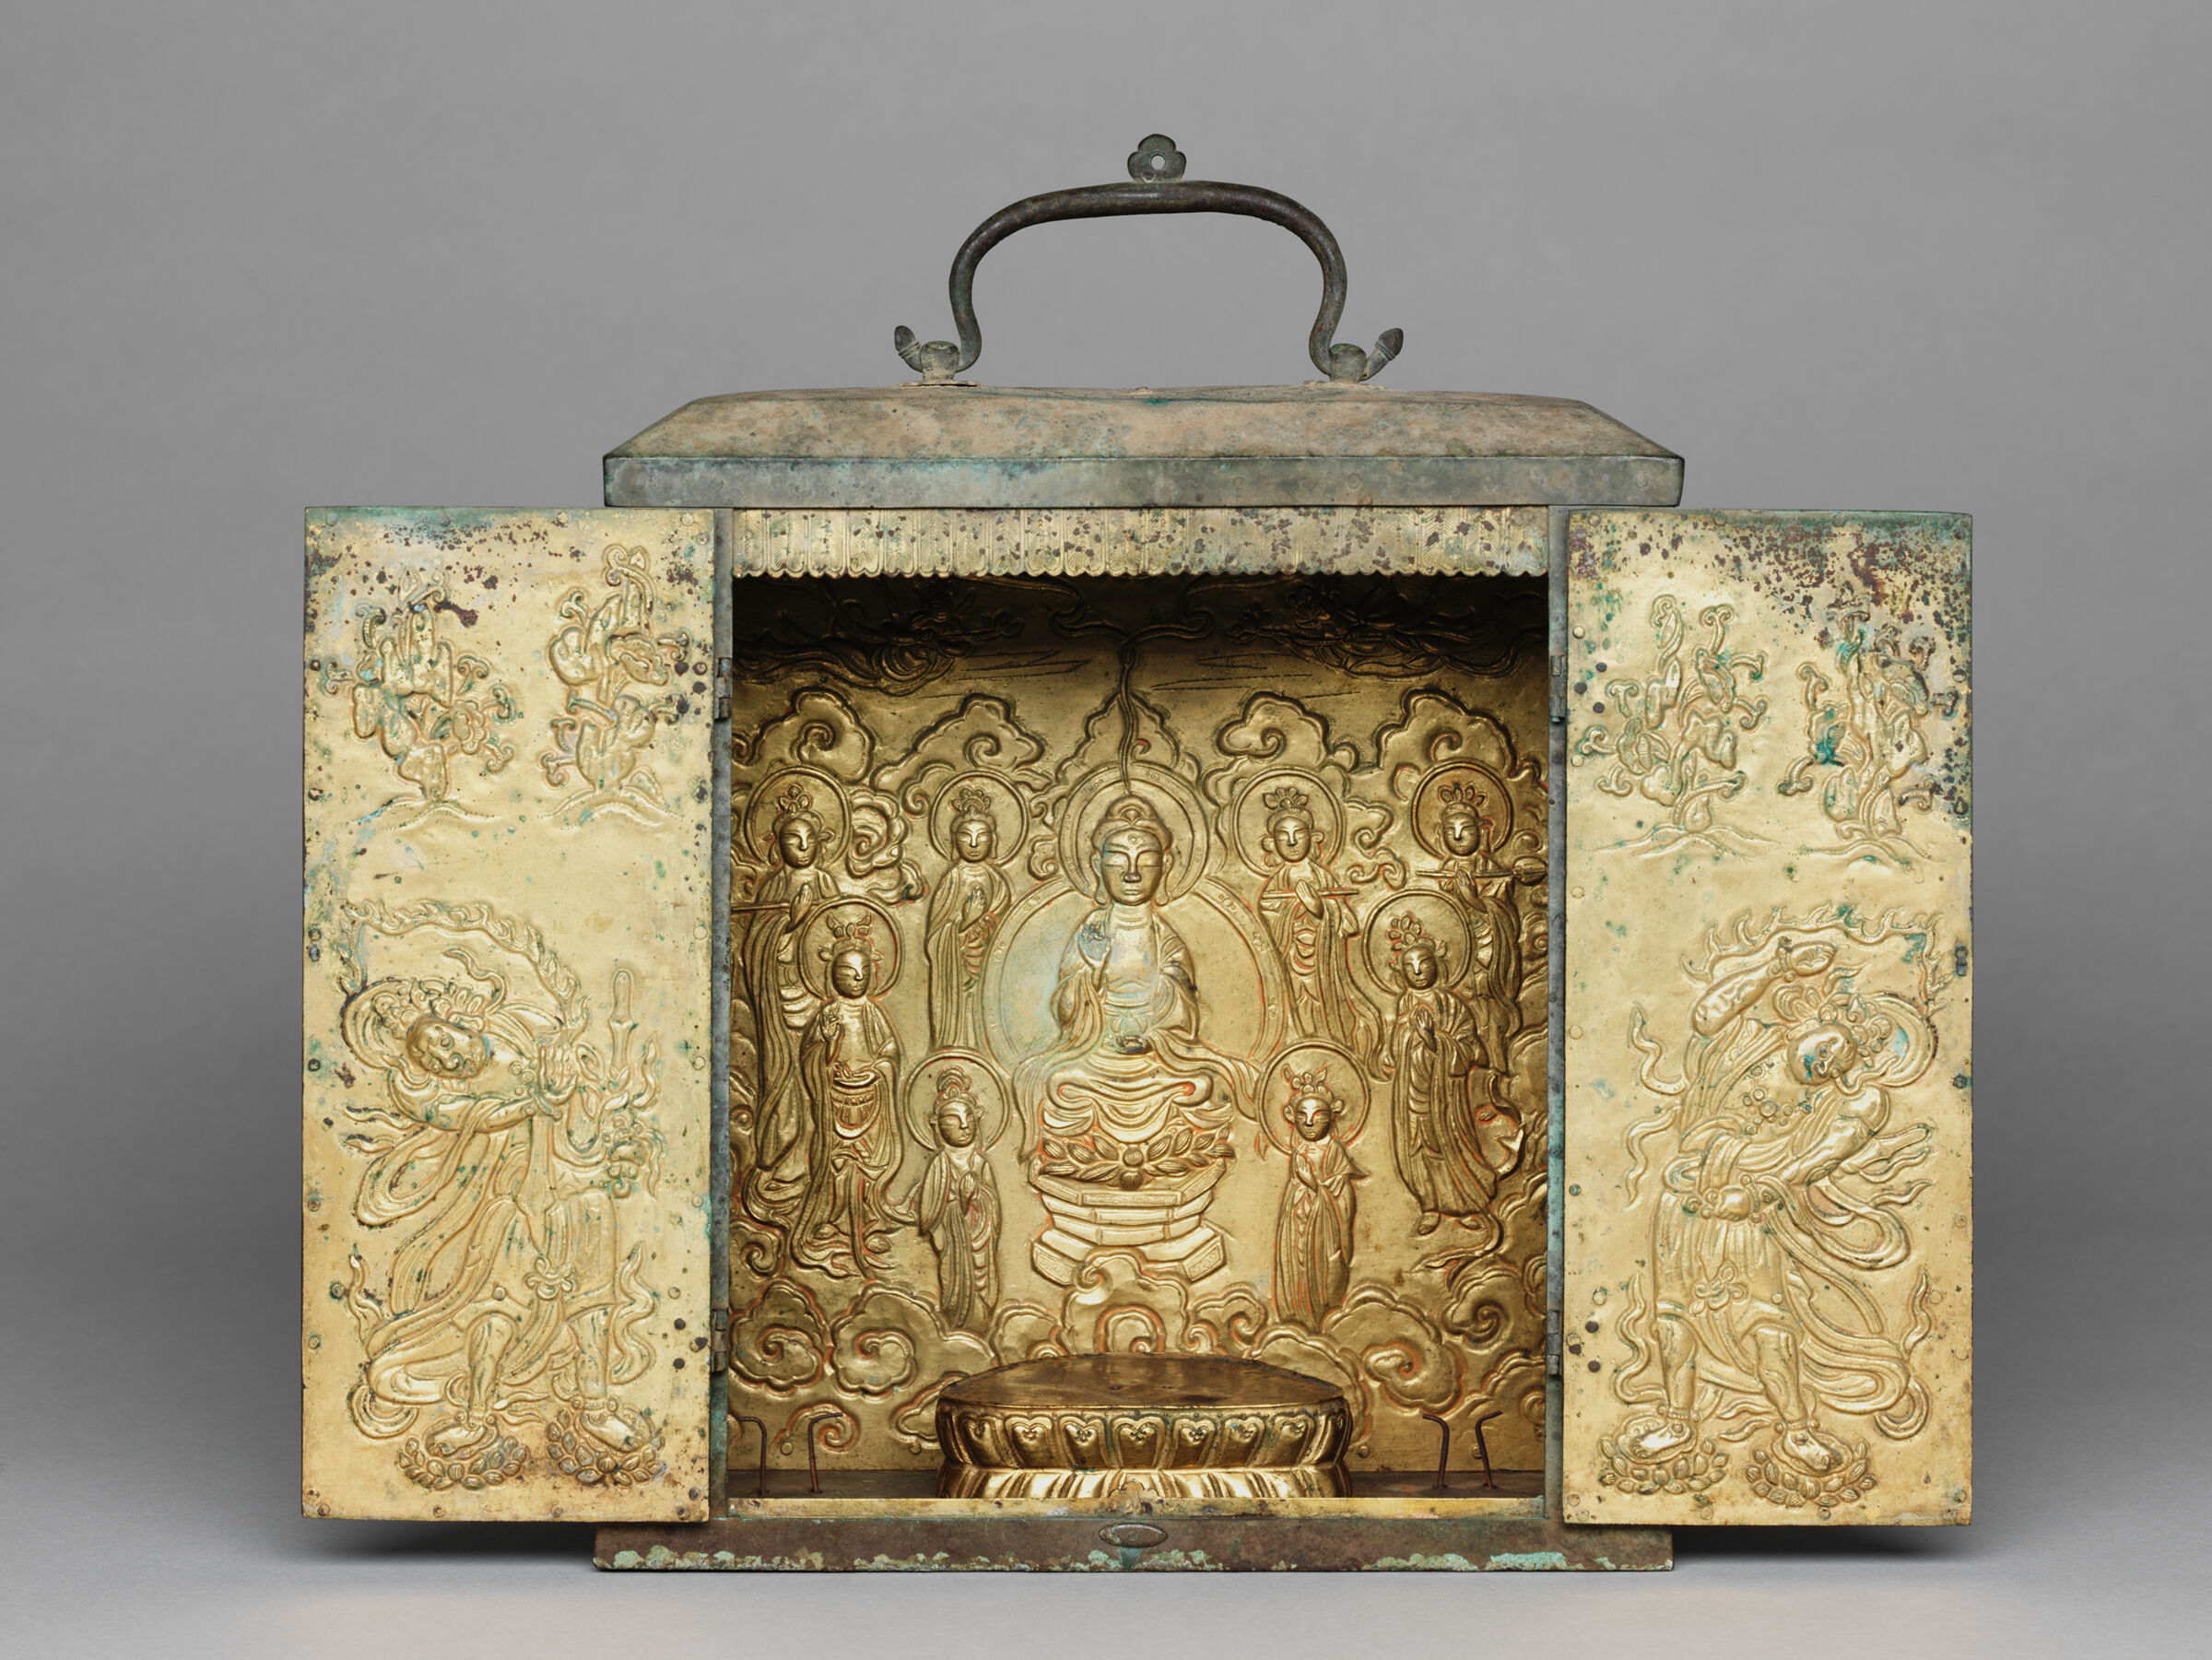 Portable Buddhist Shrine With A Repoussé Panel Depicting The Buddha Amitabha (Amit'abul) Surrounded By Bodhisattvas, Apsarases, And Other Attendants, And With Repoussé Panels On The Interiors Of The Doors Representing Guardian Figures